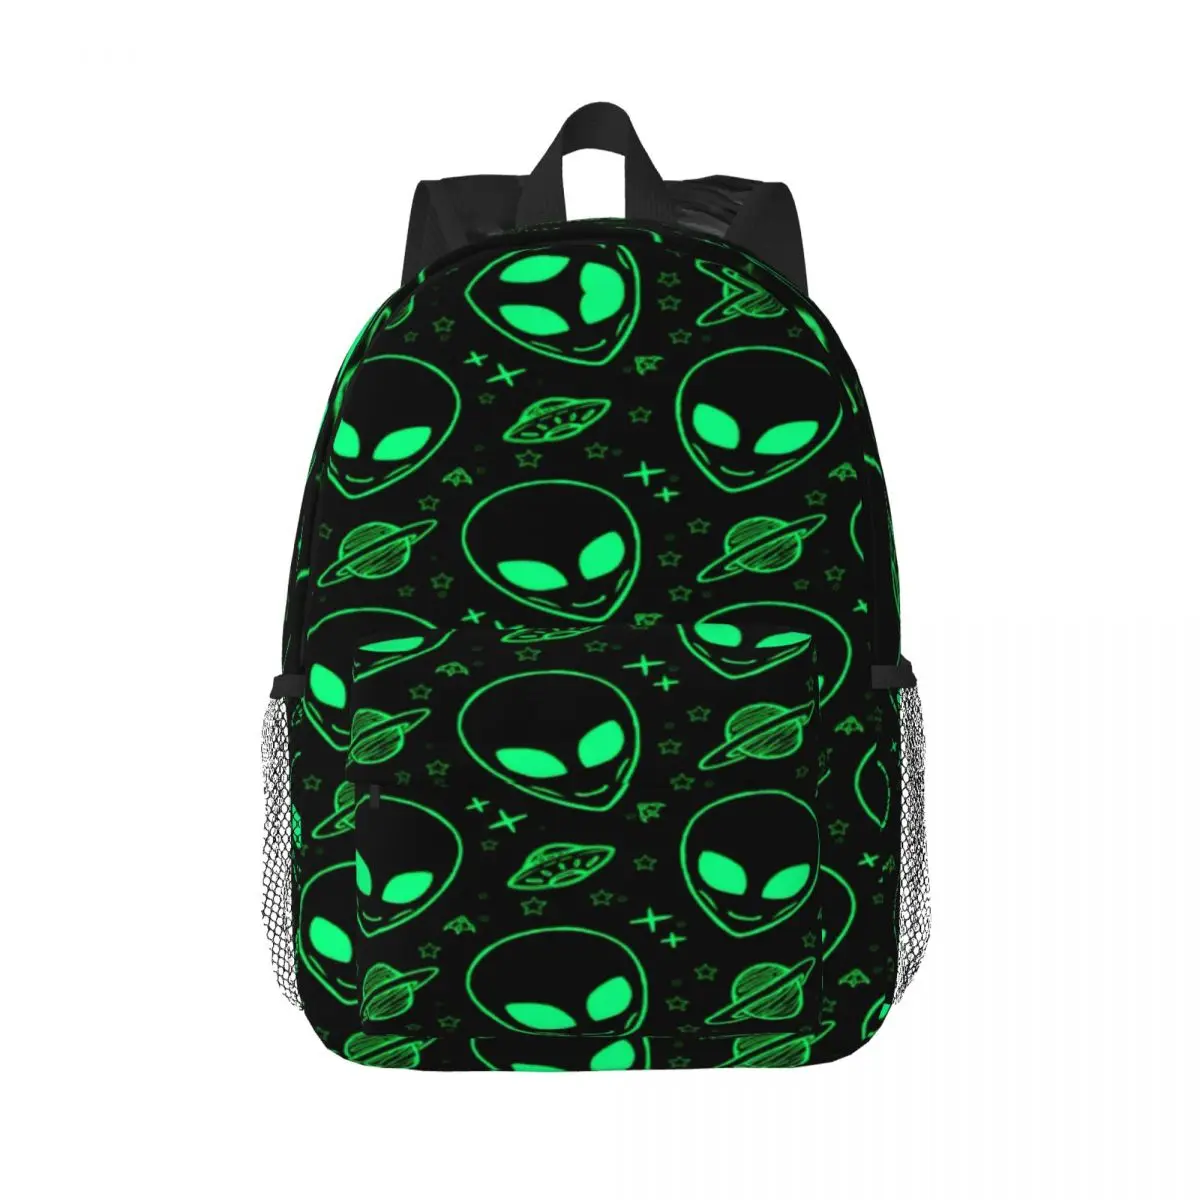 Cute Aliens And Ufo Pattern Print Backpack for Men Women College School Student Bookbag Fits 15 Inch Laptop Bags